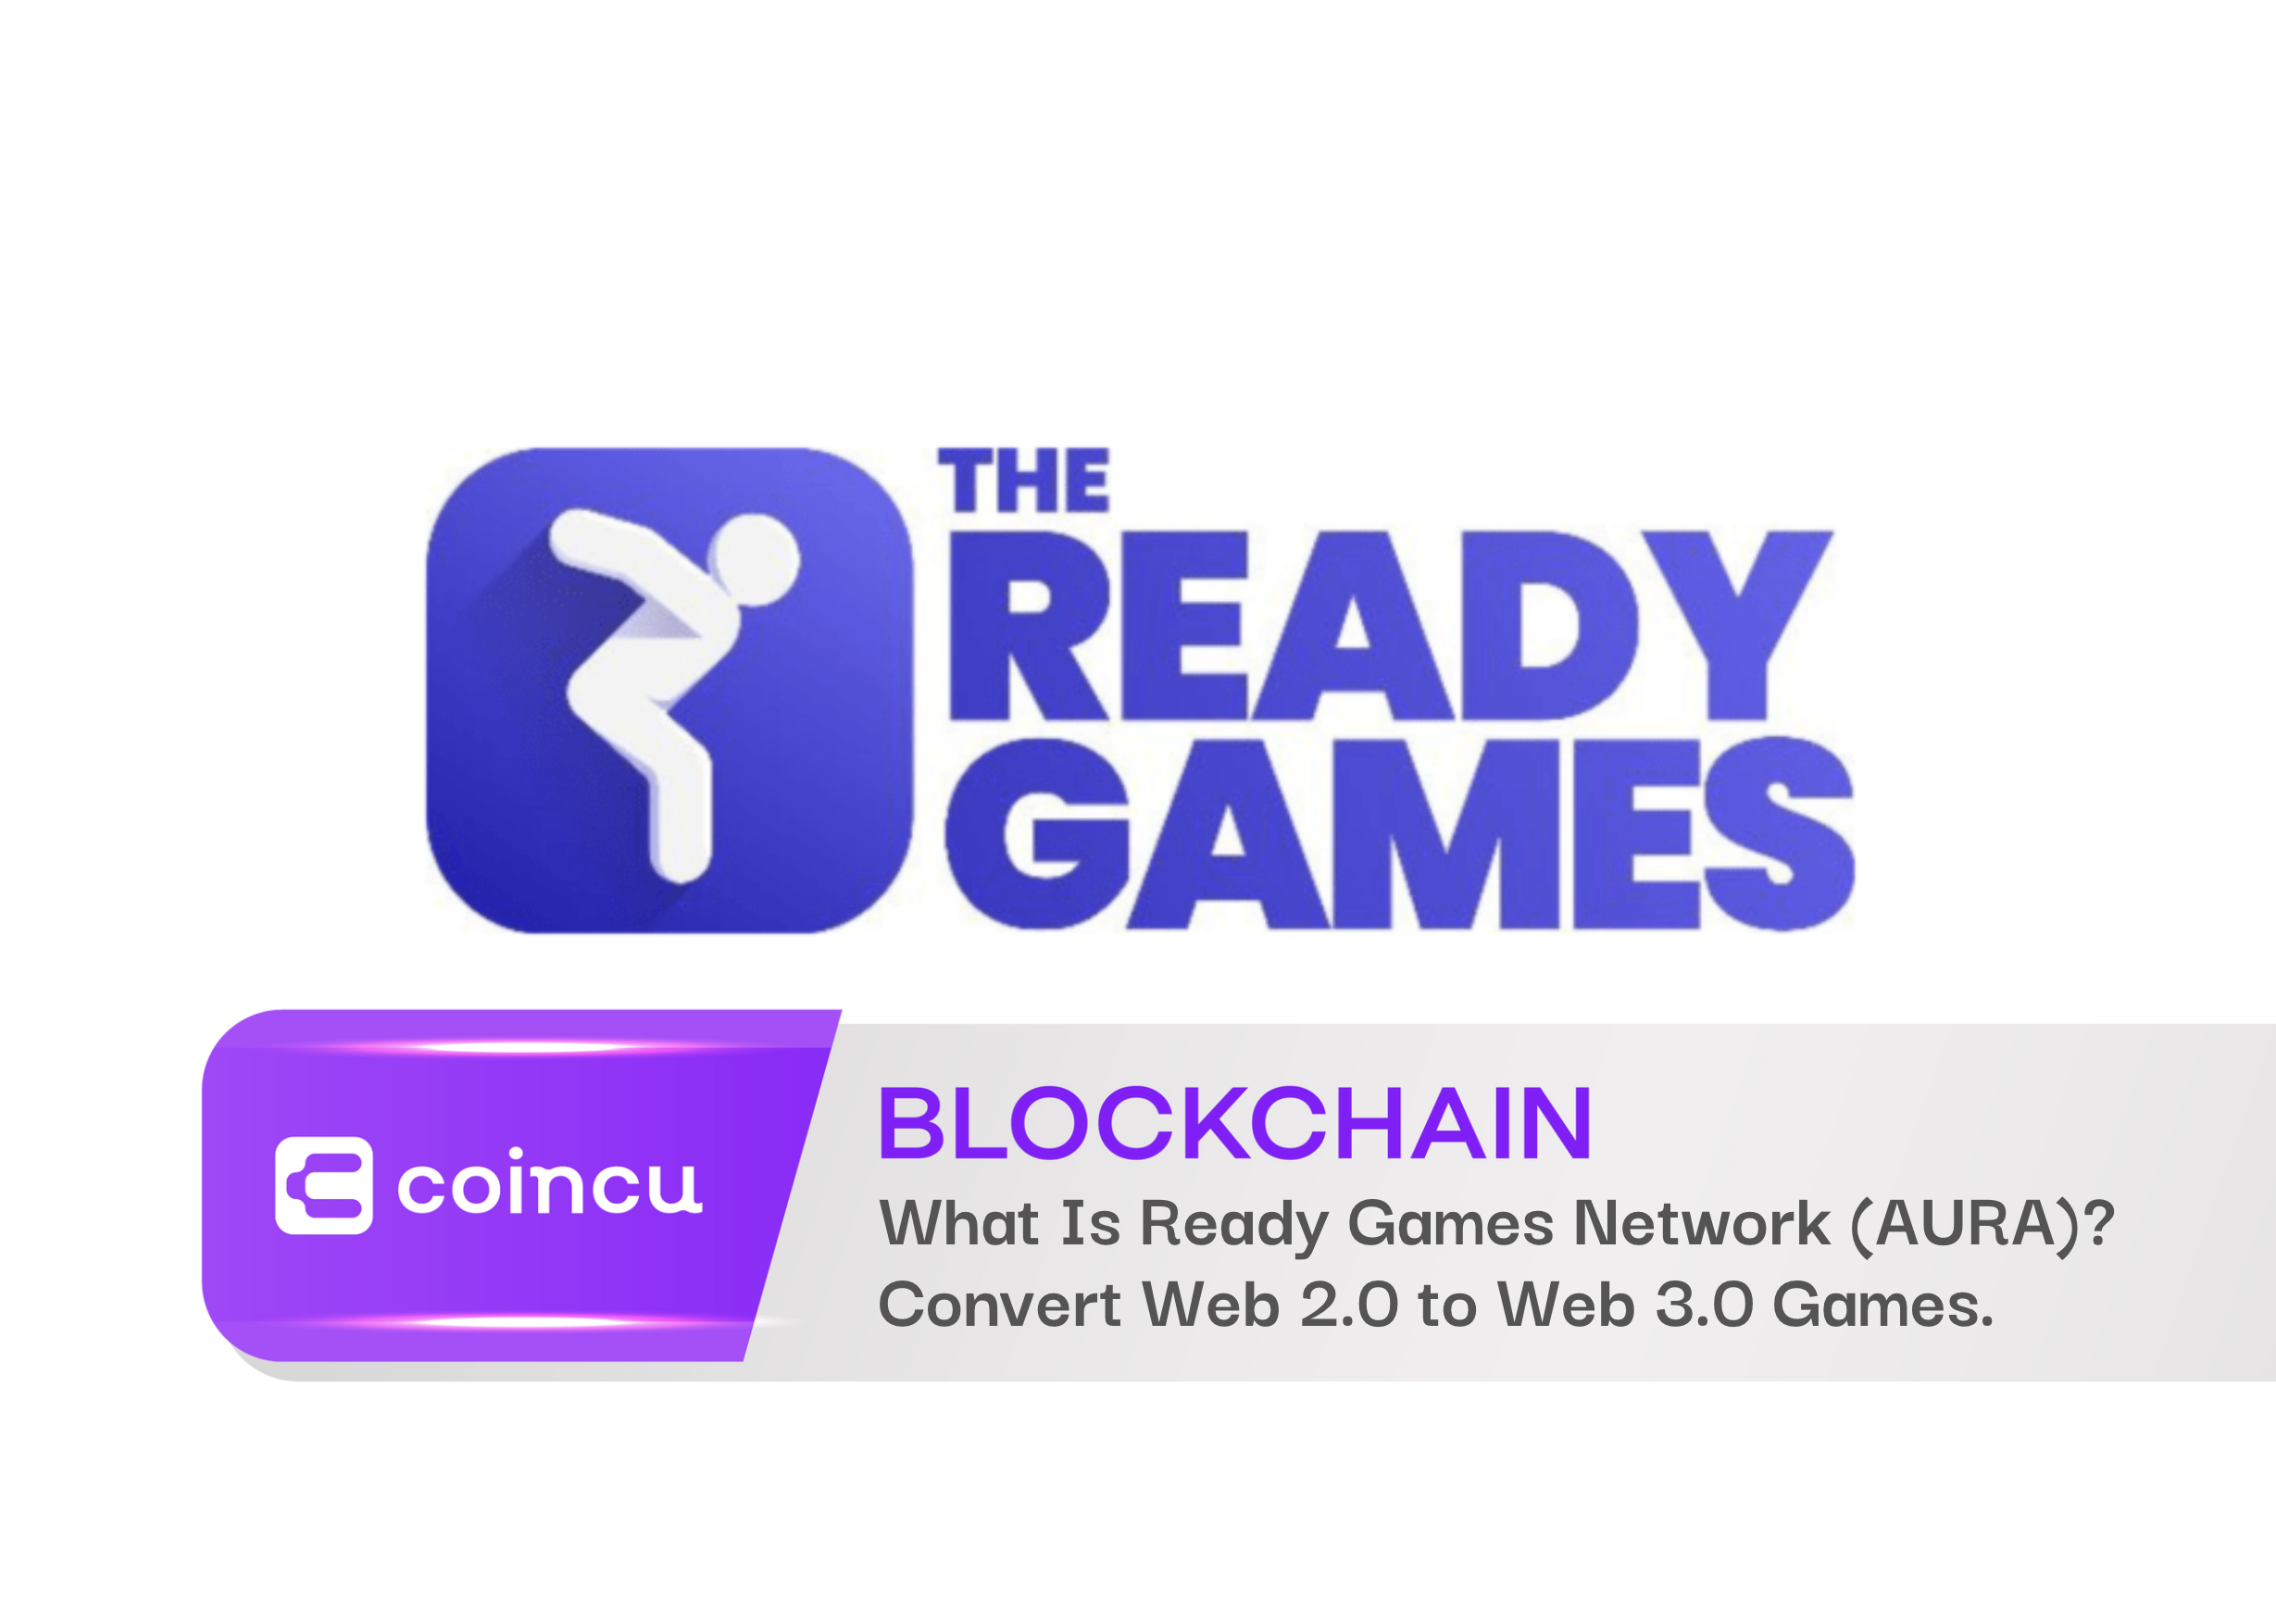 Review Ready Games Network (AURA) - Quick Solution To Convert Web 2.0 to  Web 3.0 Games. - CoinCu News